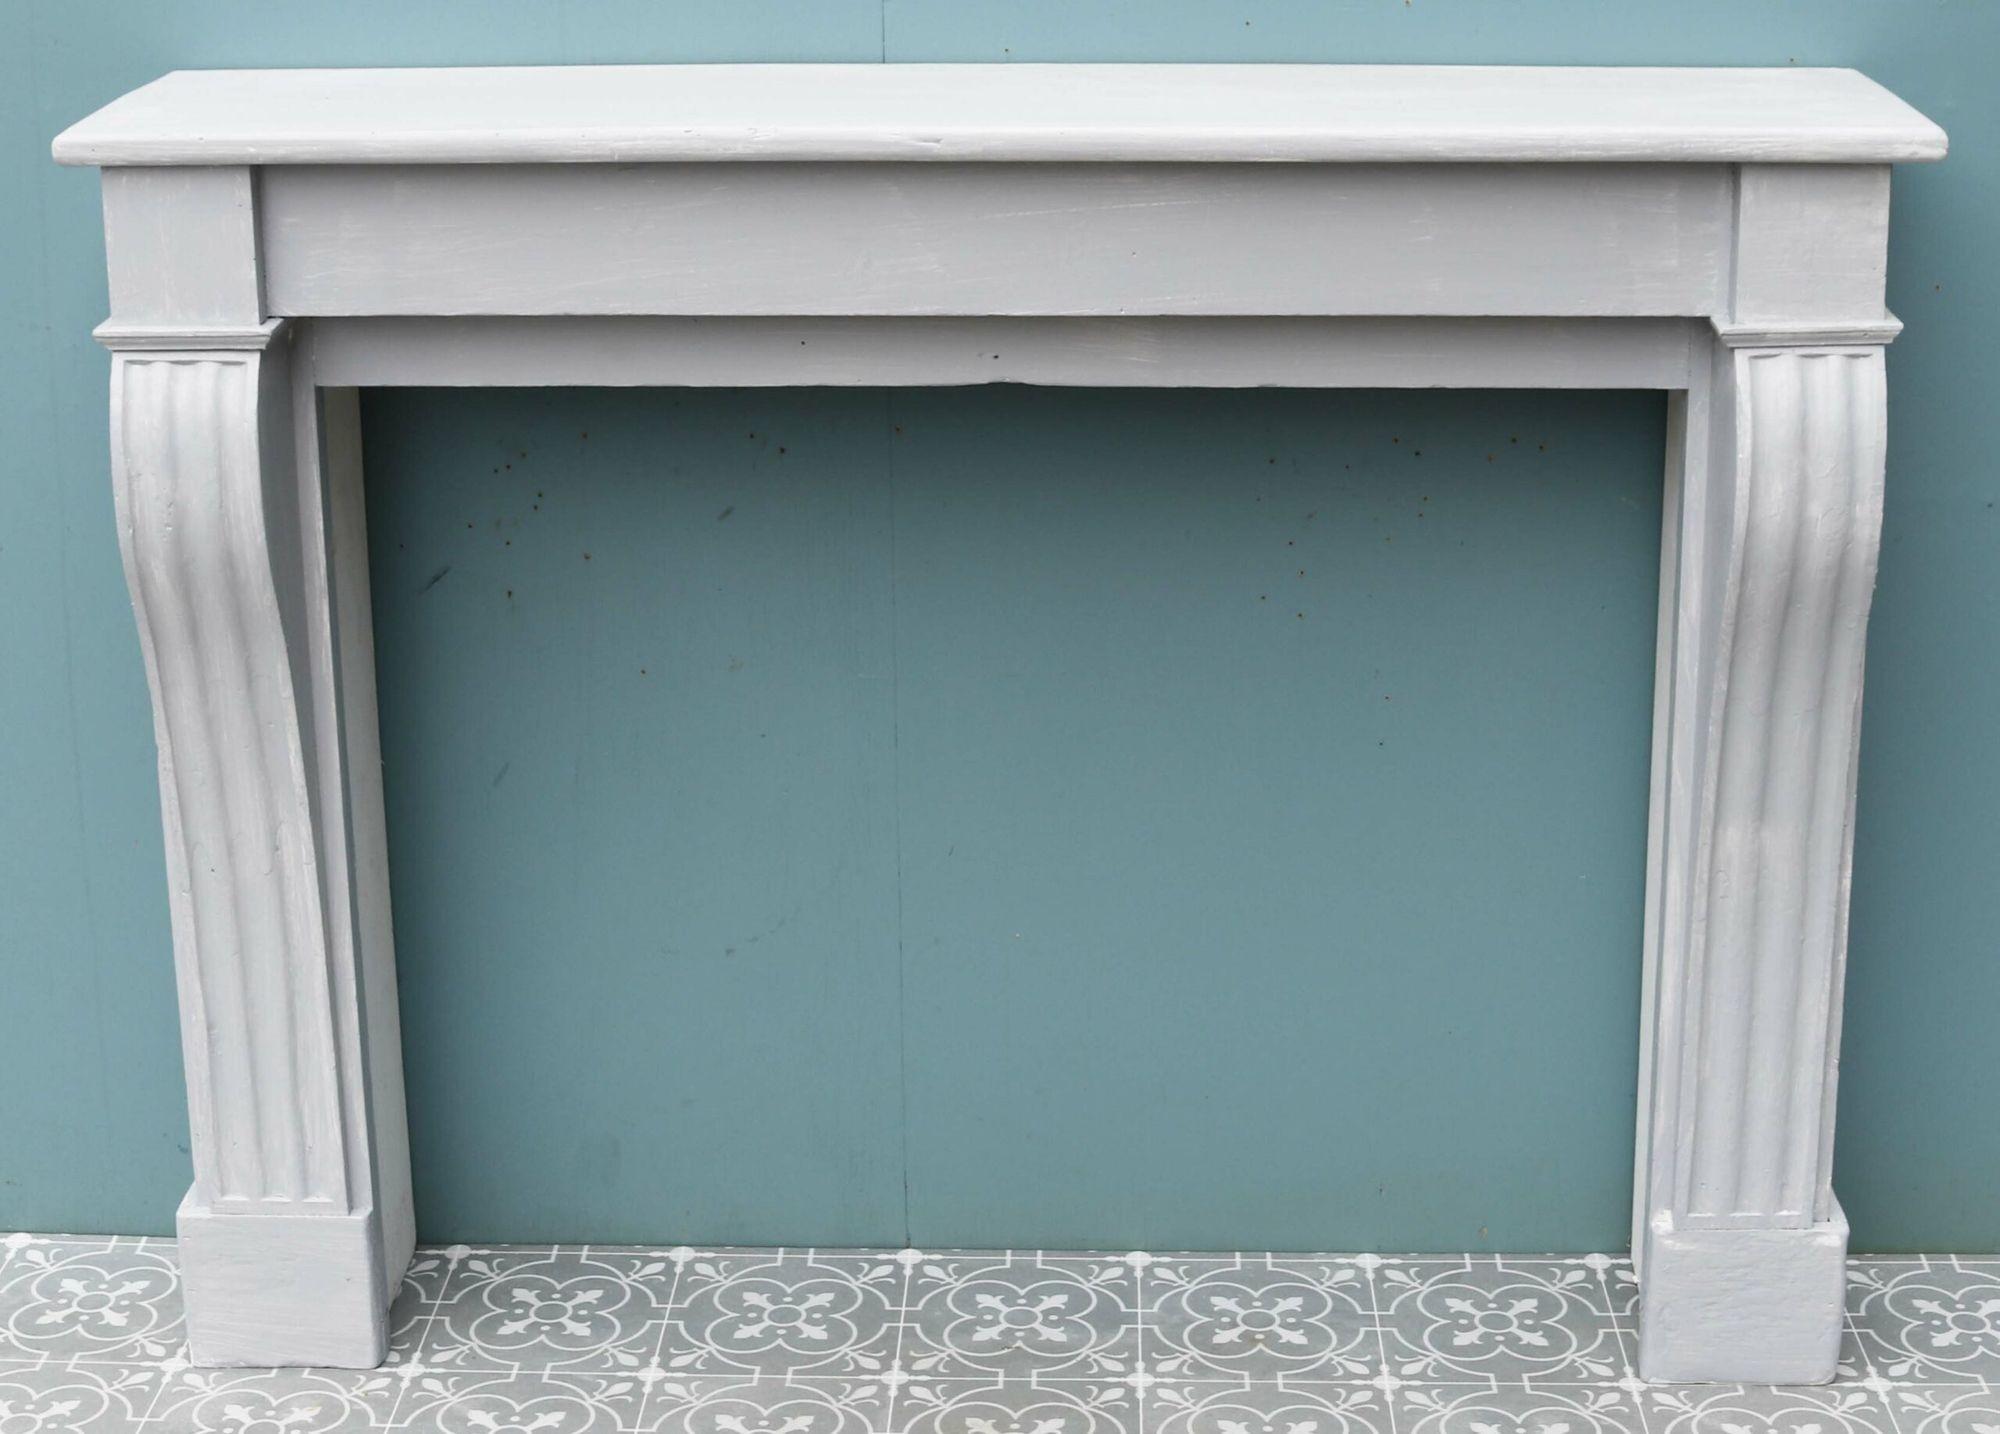 Antique Painted French Timber Fire Mantel In Fair Condition For Sale In Wormelow, Herefordshire